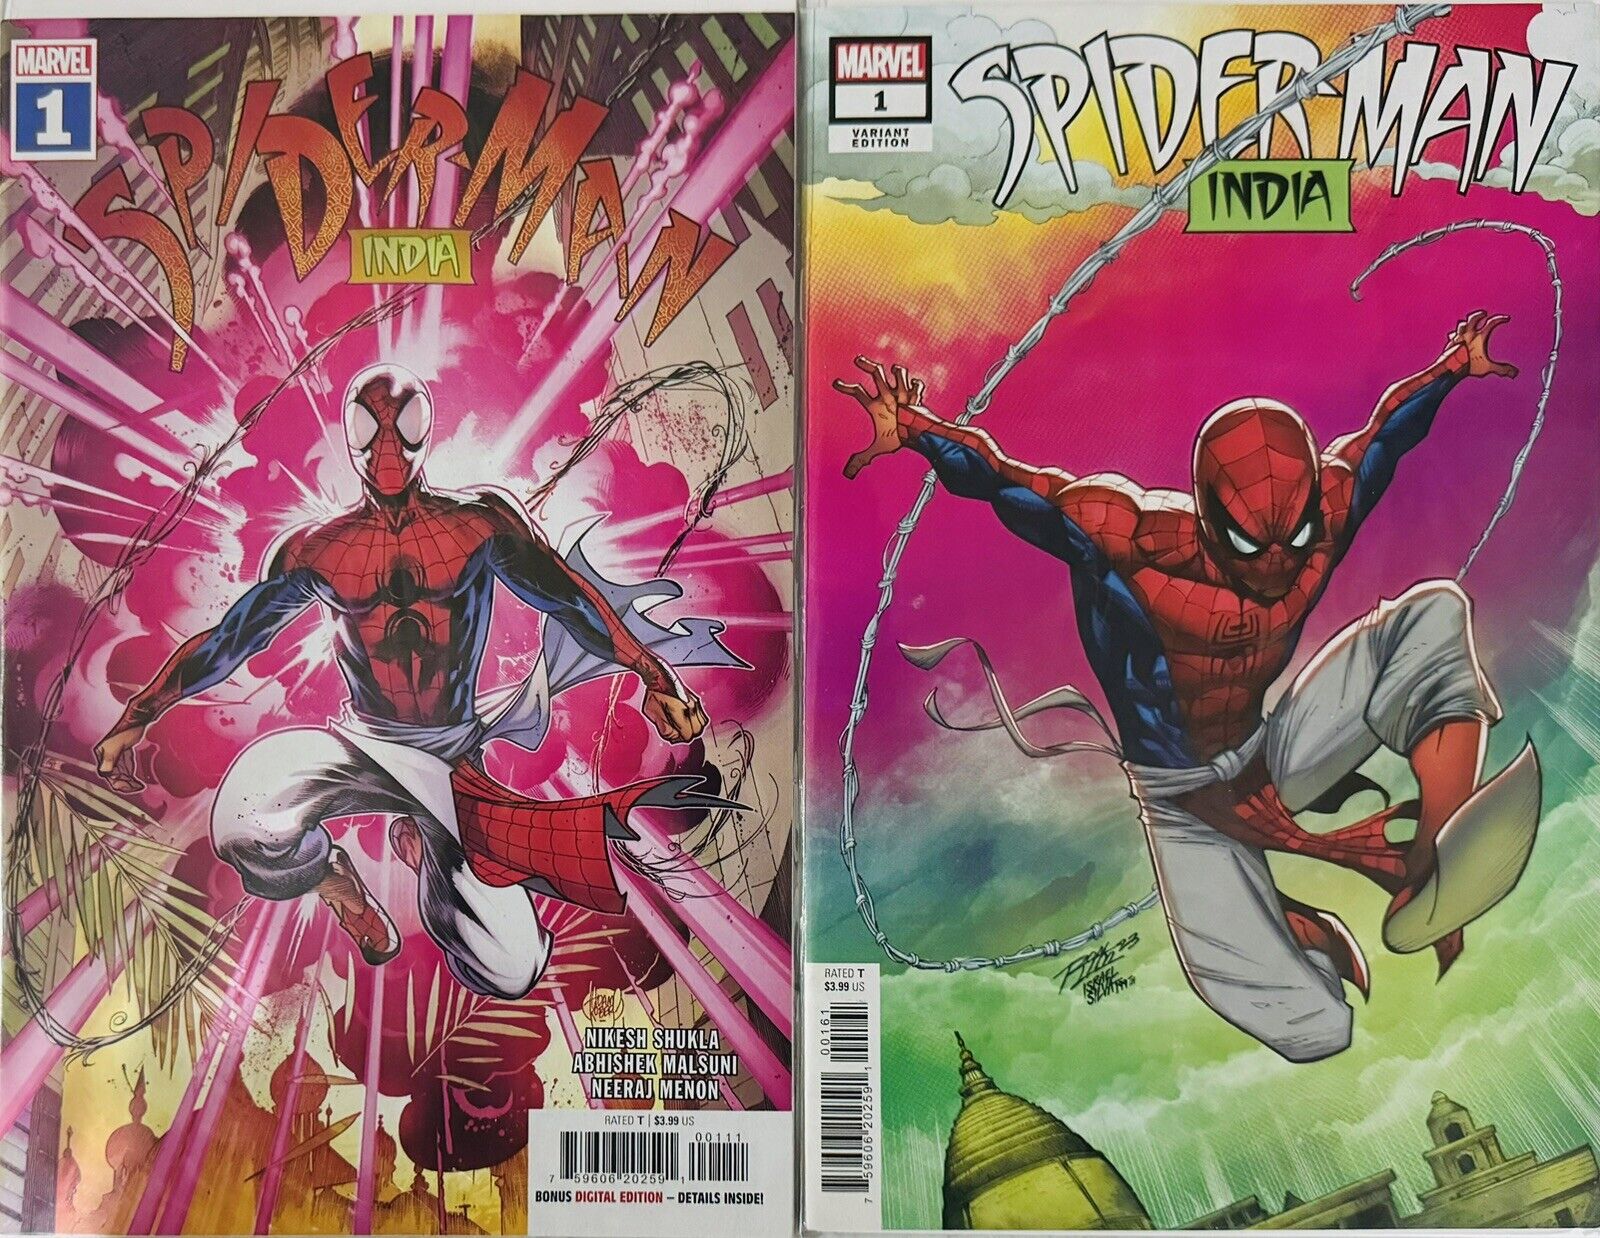 SPIDER-MAN INDIA #1 MAIN COVER AND RON LIM TRADE DRESS VARIANT SET MARVEL 2023